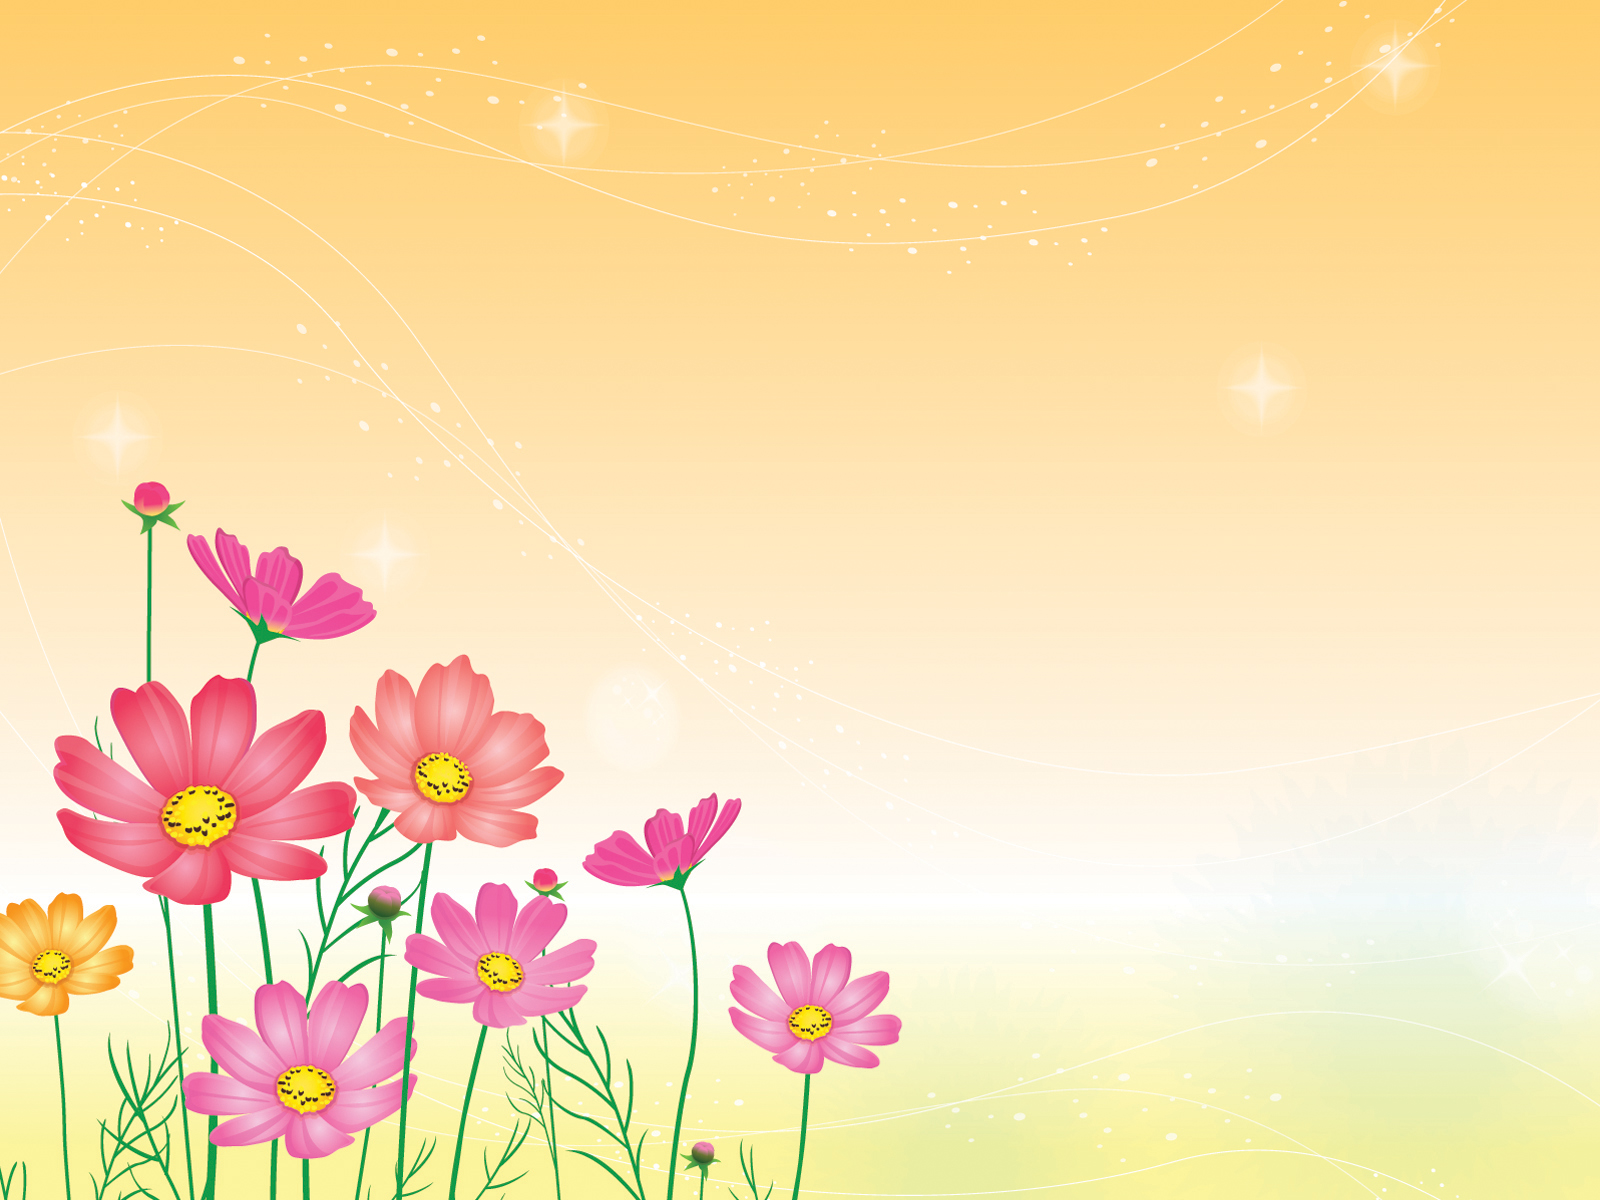 Dream Flowers Garden Powerpoint Templates - Flowers, Fuchsia / Magenta,  Orange - Free PPT Backgrounds and Templates